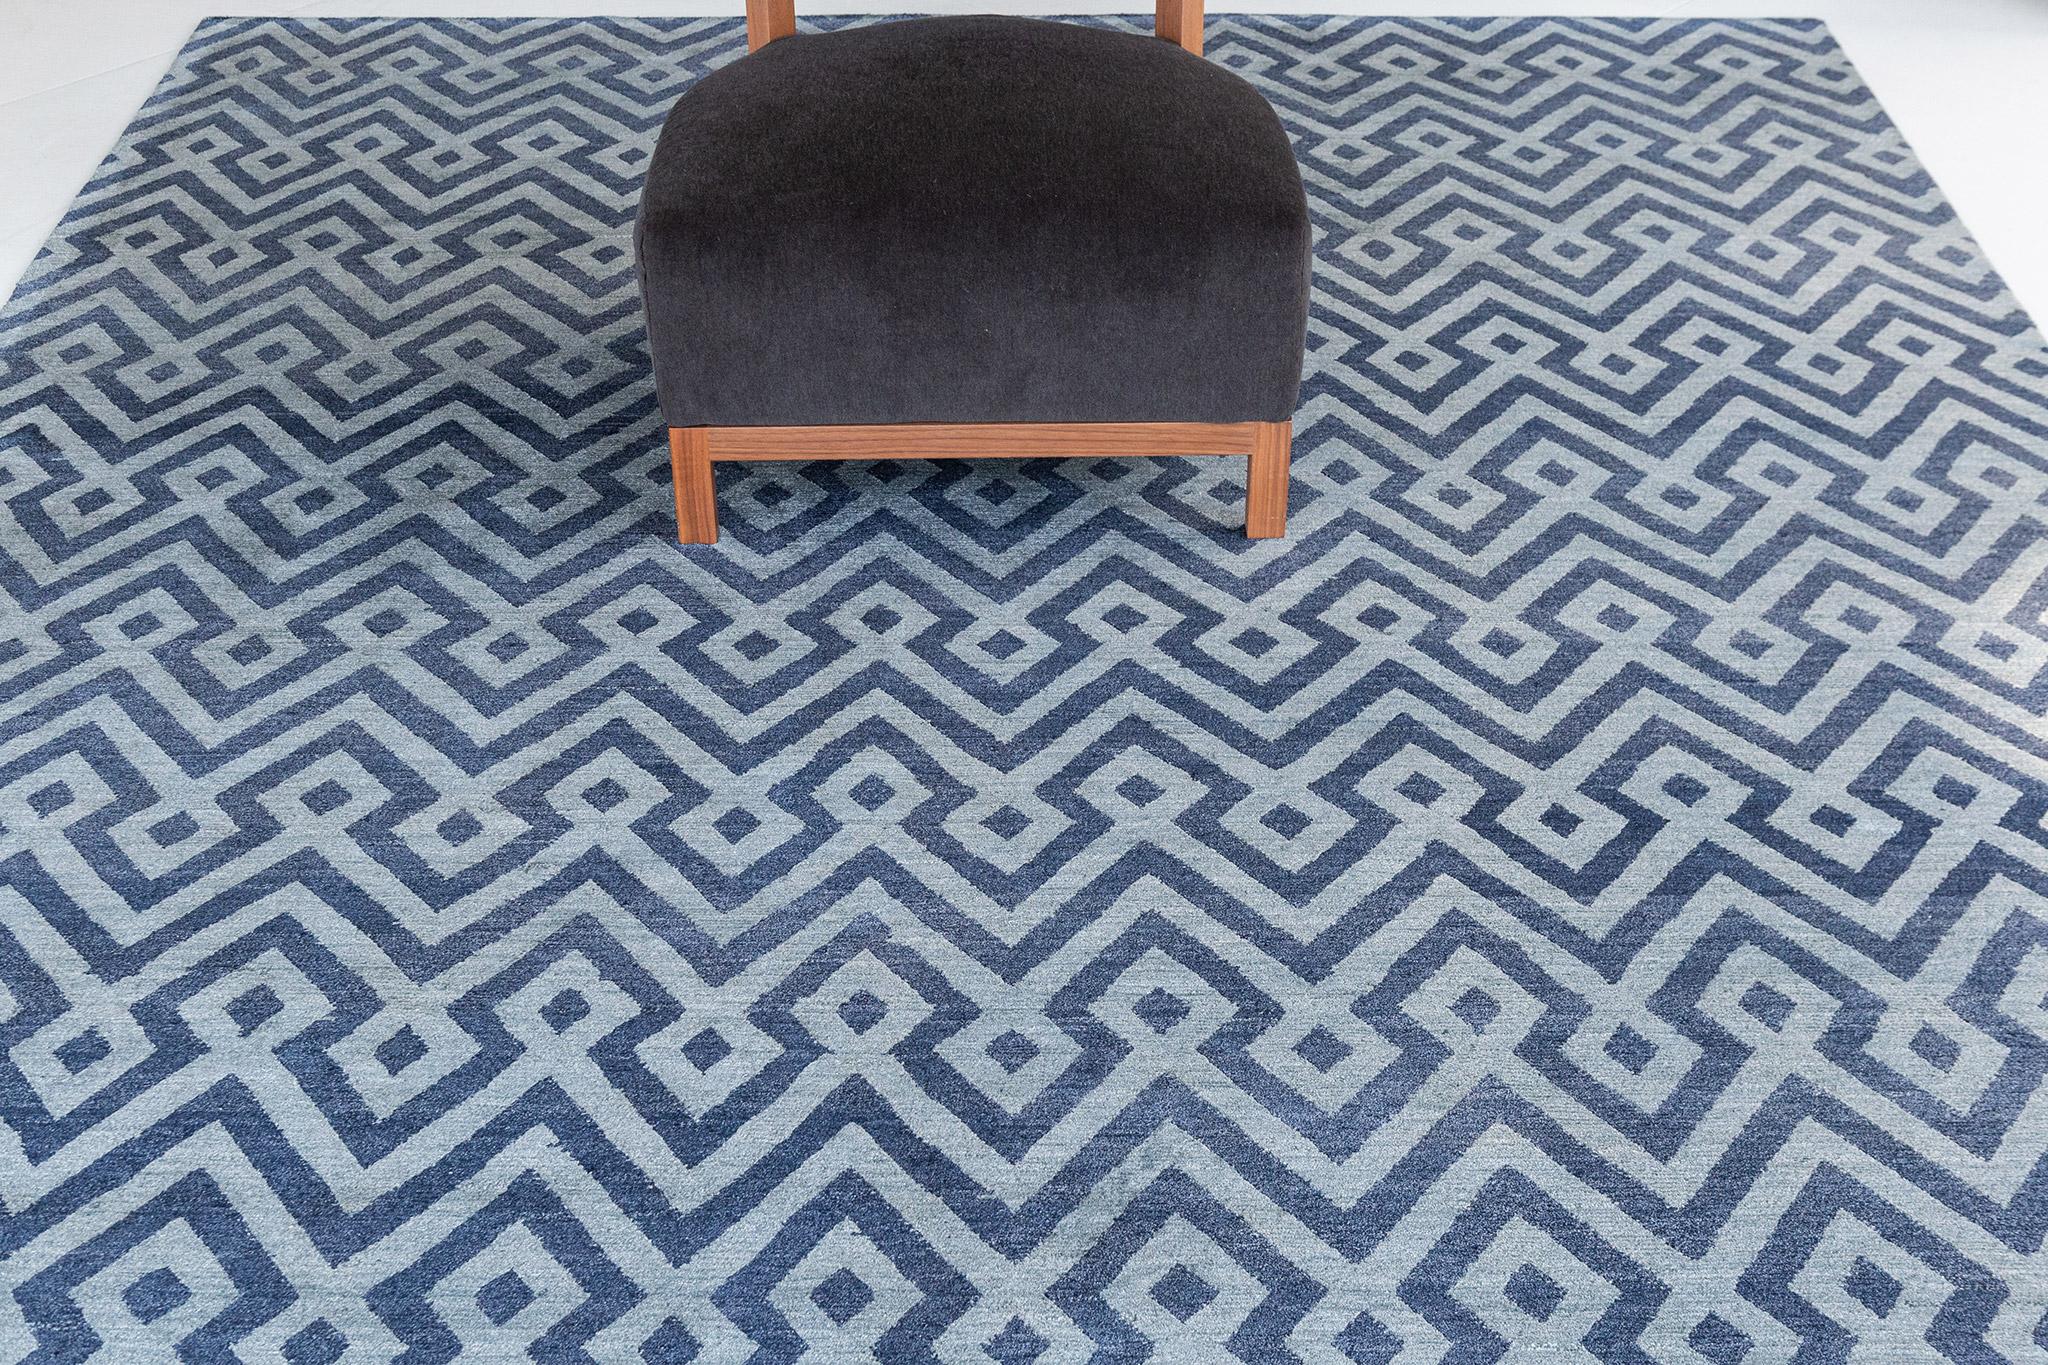 Devi is a bamboo silk rug in an all-over chevron-like with geometric diamond pattern outlined in pale and opaque blue. This masterpiece complements a contemporary and minimalist interior that everybody would adore.

Rug Number
25829
Size
8' 0